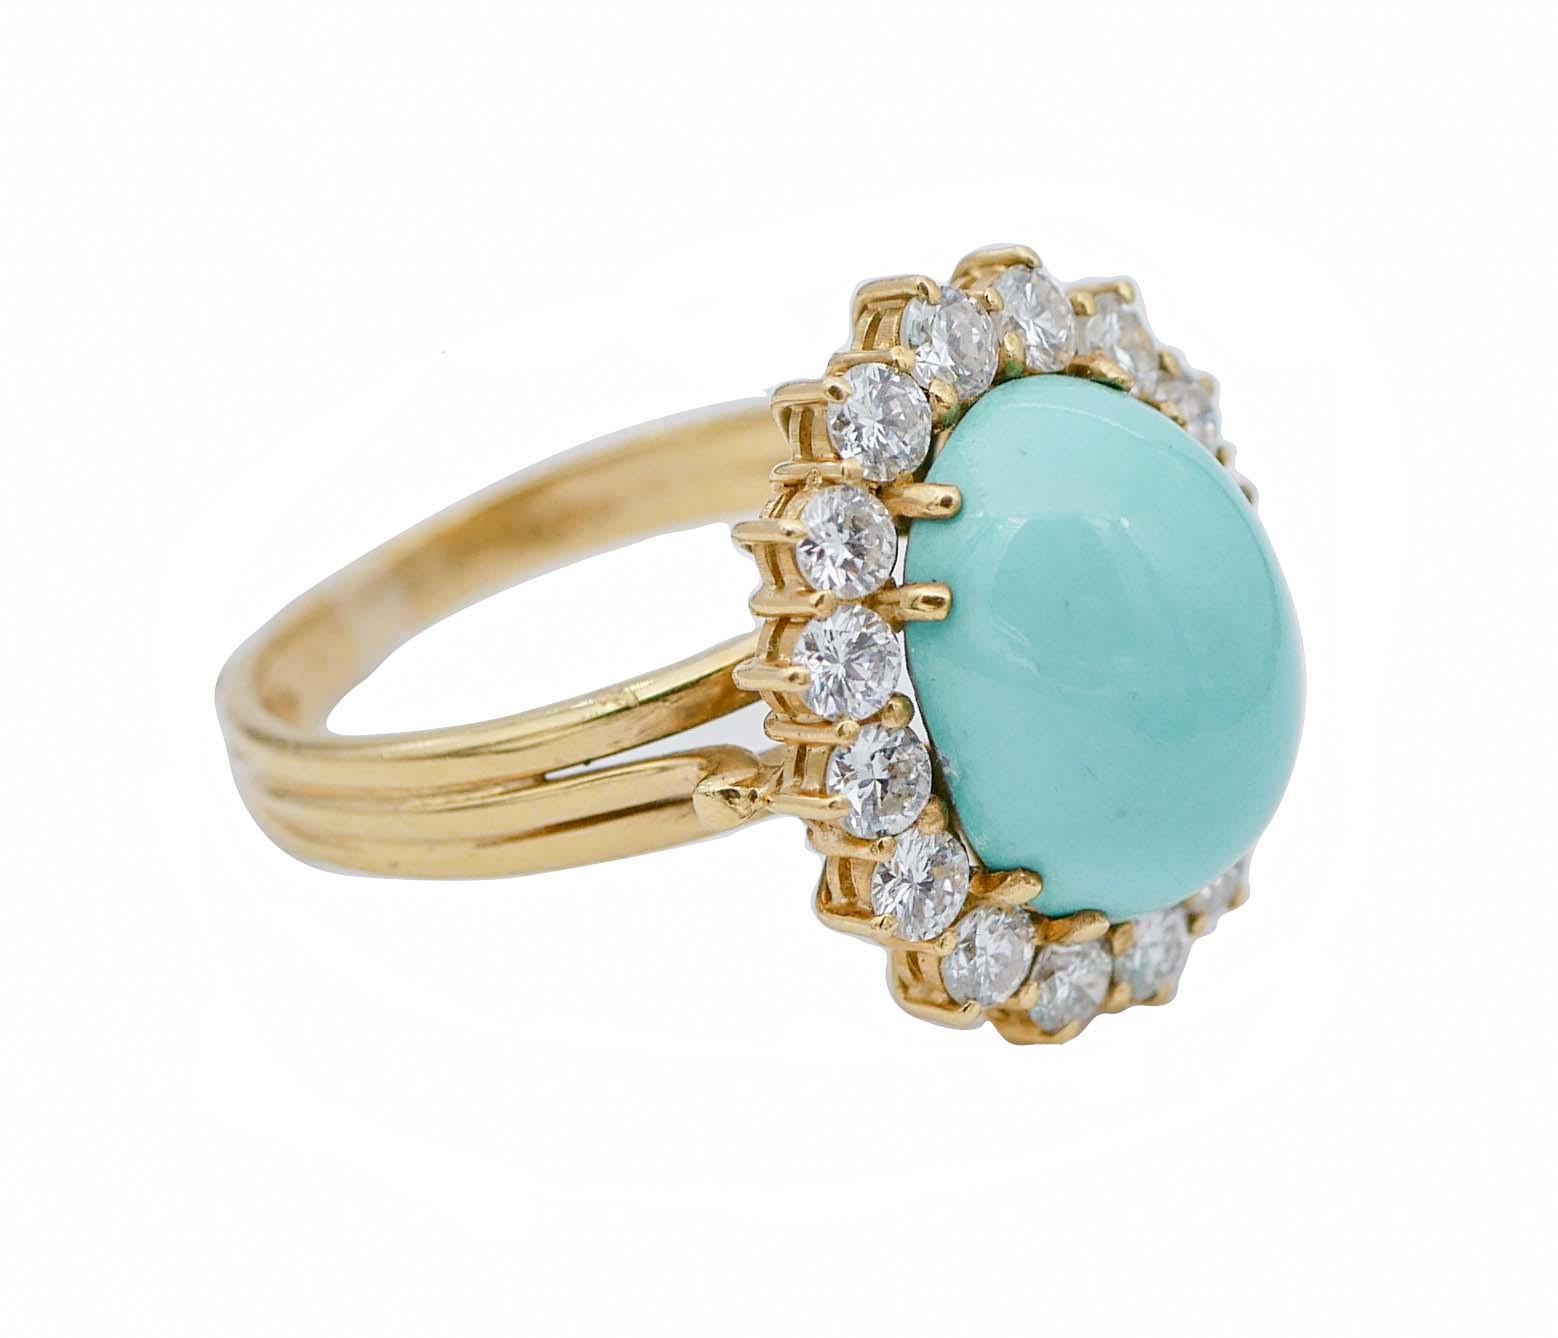 SHIPPING POLICY:
No additional costs will be added to this order.
Shipping costs will be totally covered by the seller (customs duties included).

Elegant retrò ring in 18 kt yellow gold structure munted with a central turquoise surrounded by